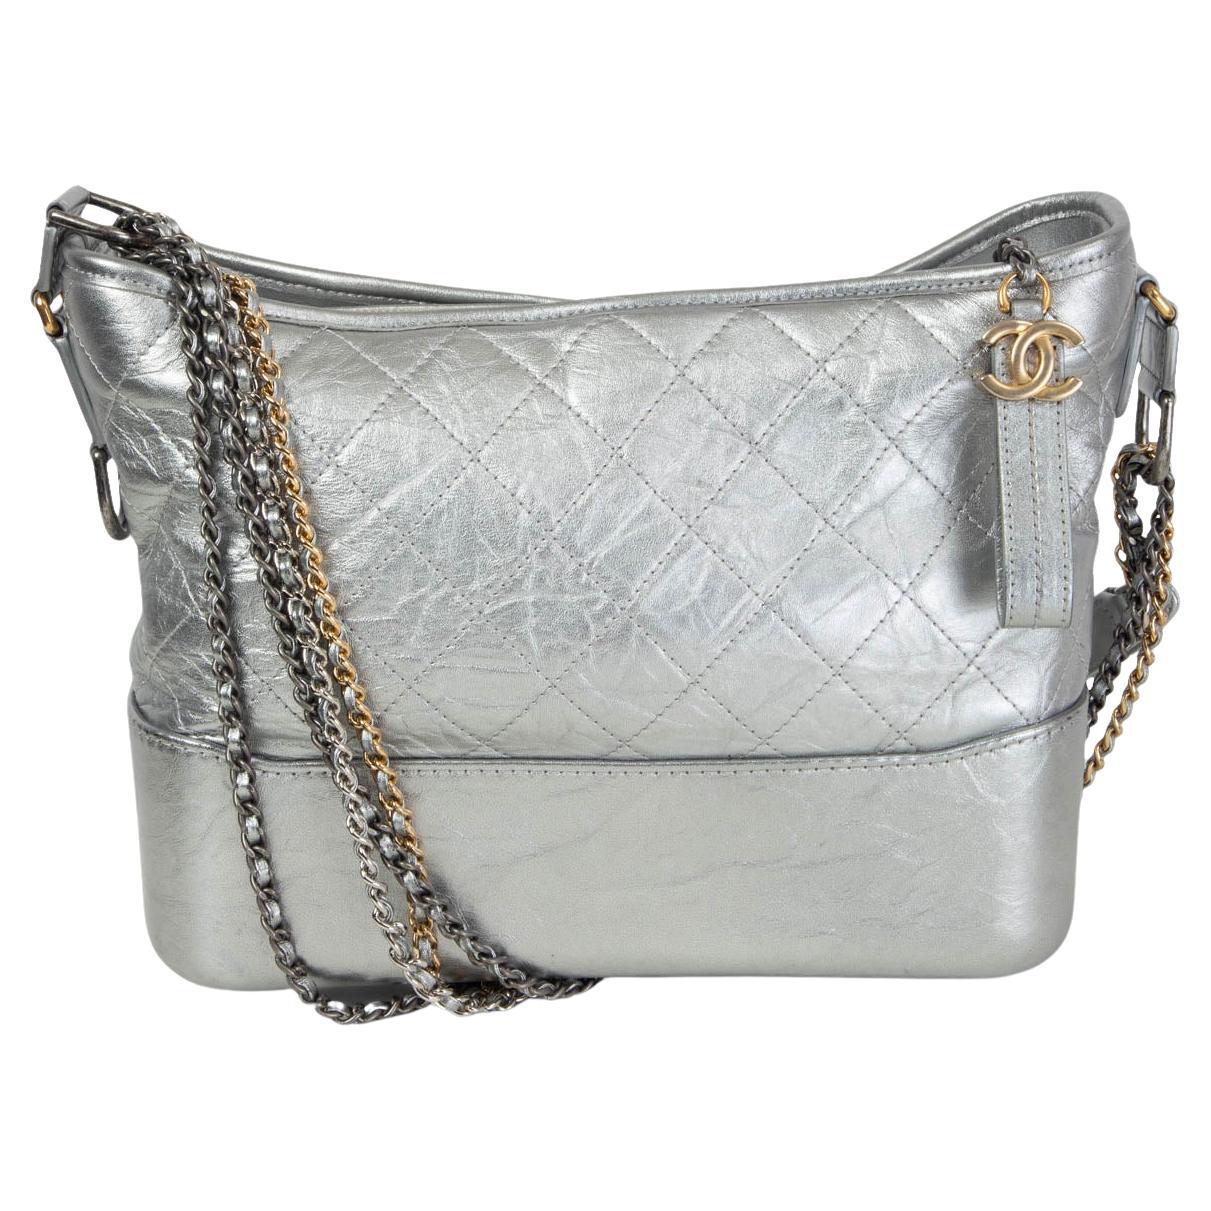 CHANEL metallic silver quilted leather 2017 GABRIELLE MEDIUM HOBO Shoulder Bag For Sale